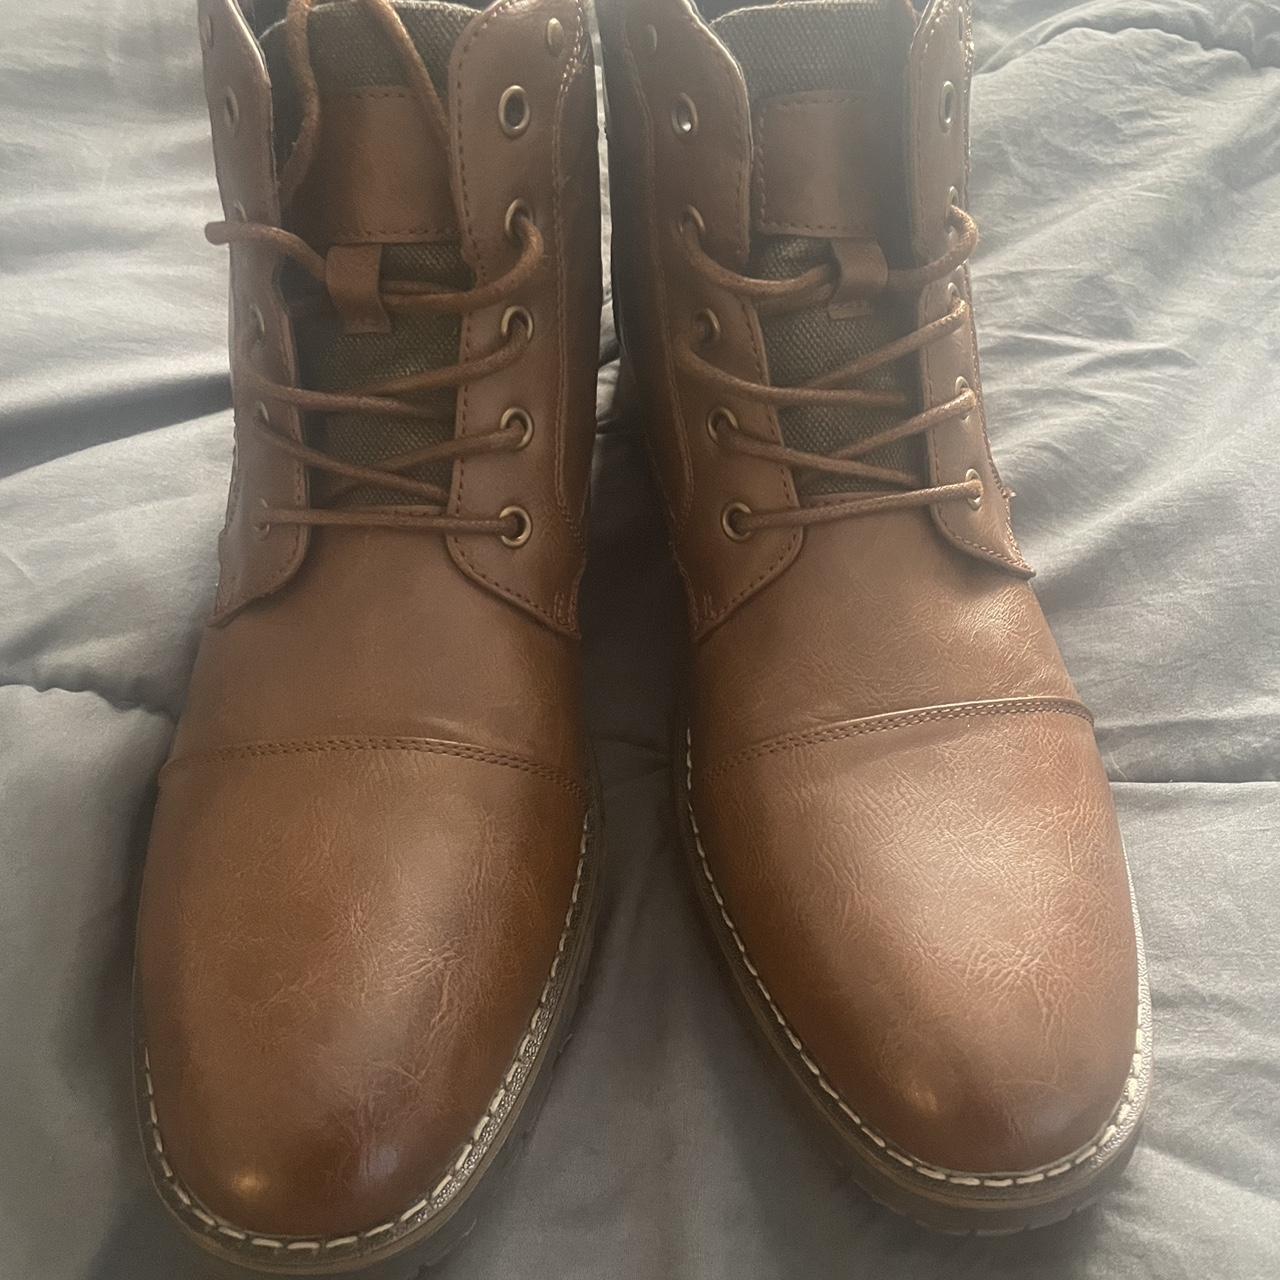 Vintage Style Brown Leather boots - Depop